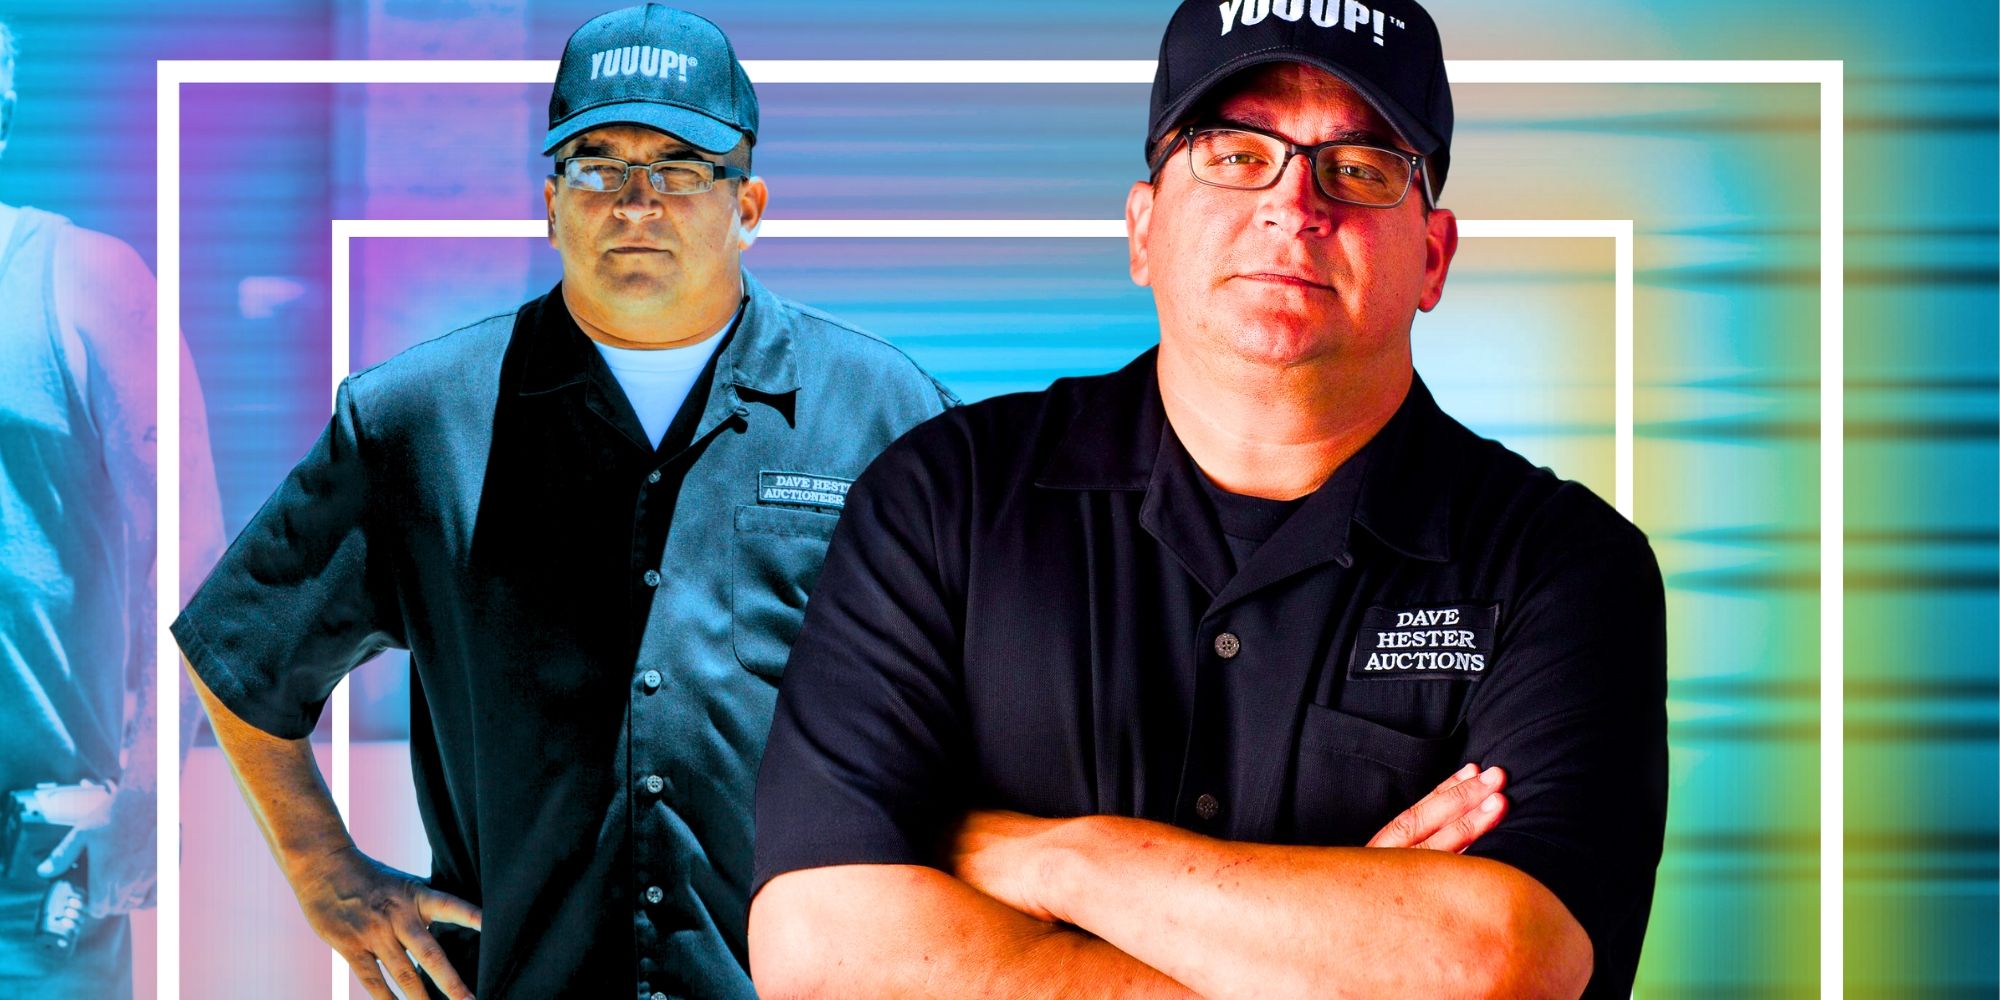 storage wars star dave hester in montage featuring two photos of him looking serious and a blue and yellow background